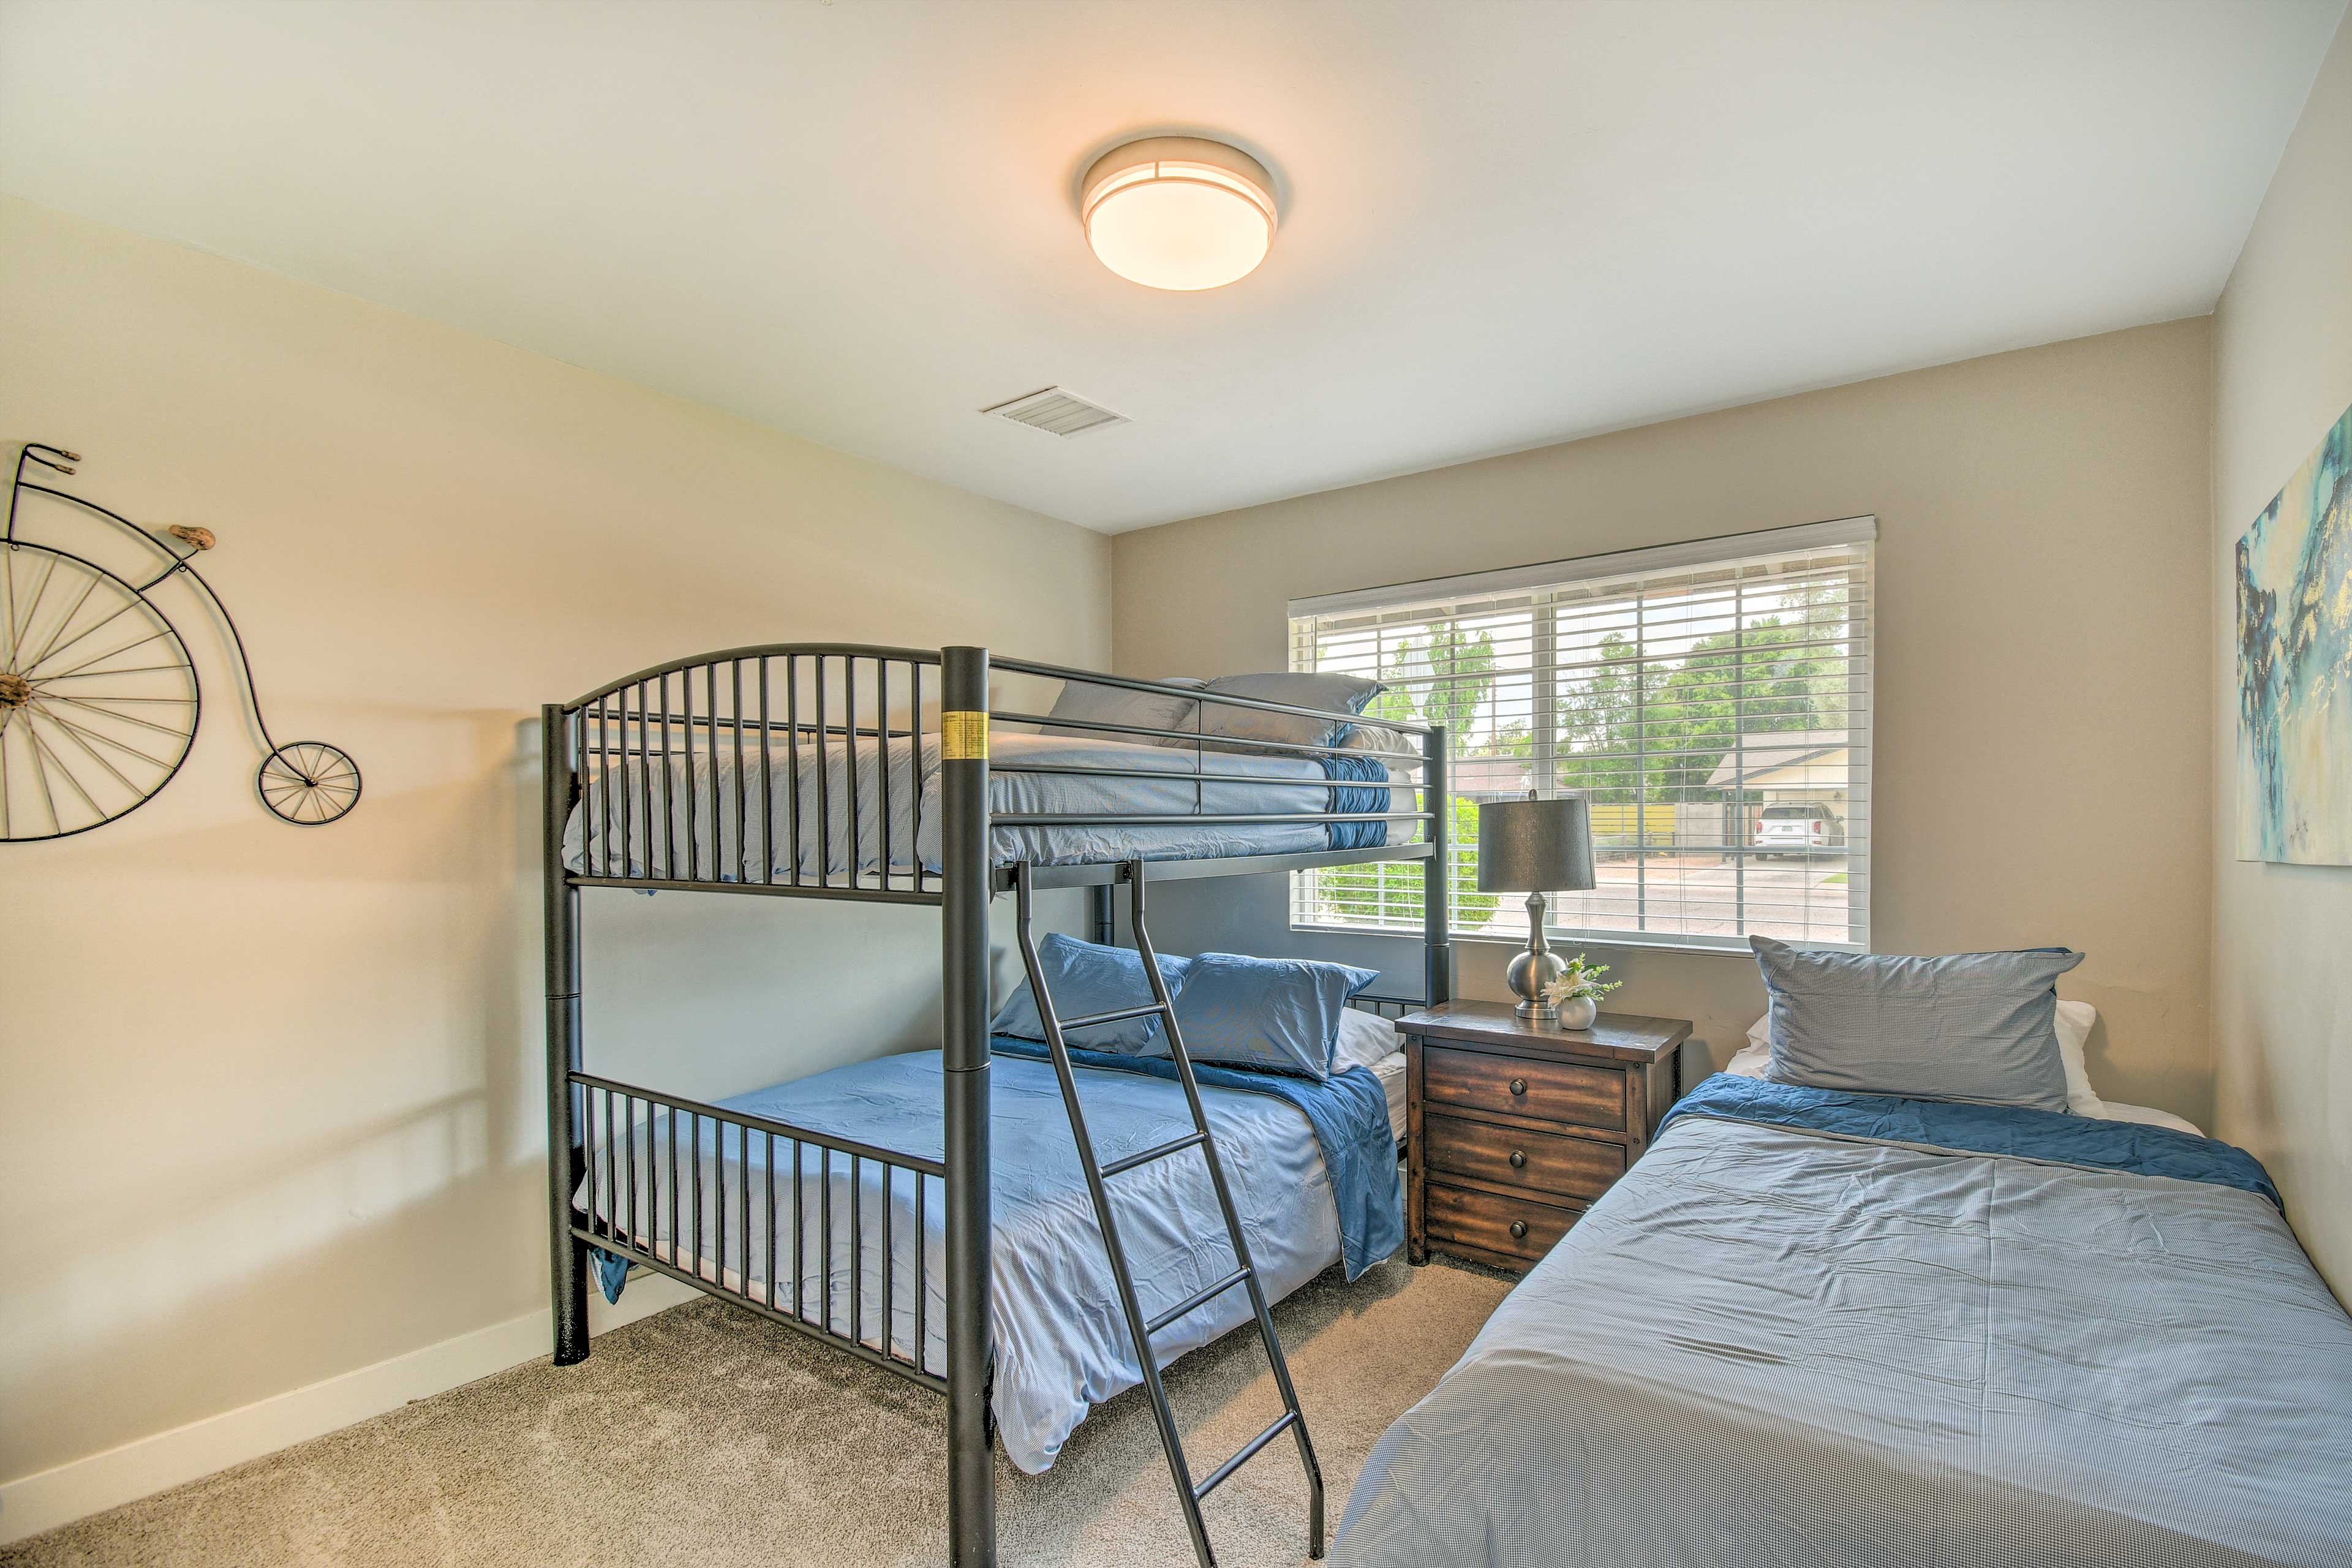 Bedroom 2 | Full Bunk Bed, Twin Bed | Hangers Available